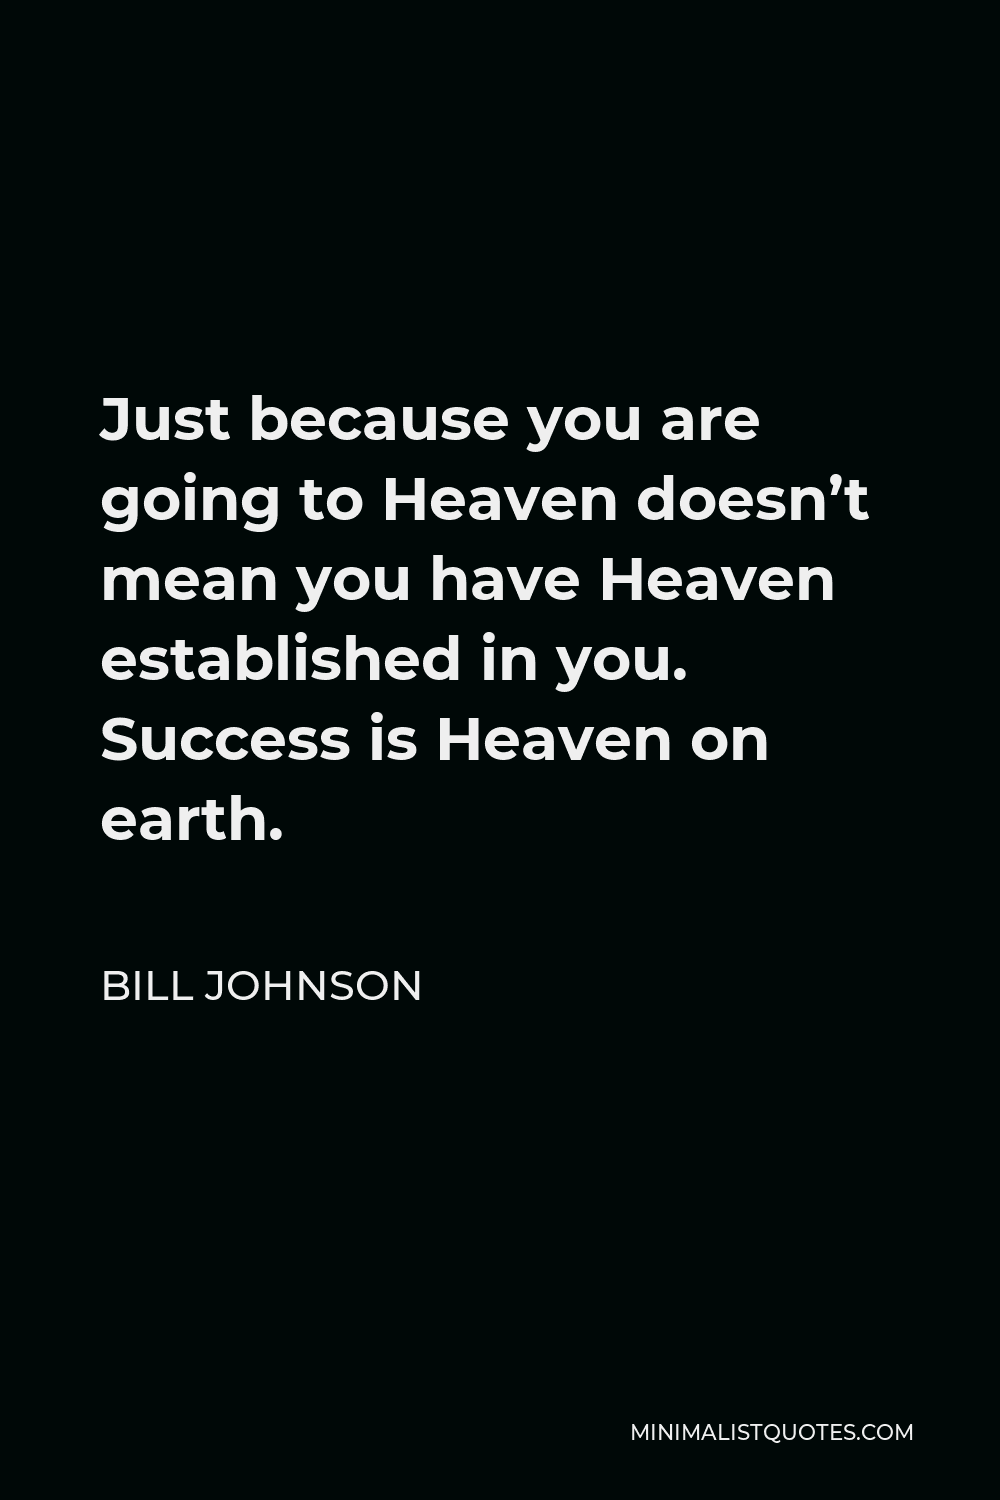 Bill Johnson Quote - Just because you are going to Heaven doesn’t mean you have Heaven established in you. Success is Heaven on earth.